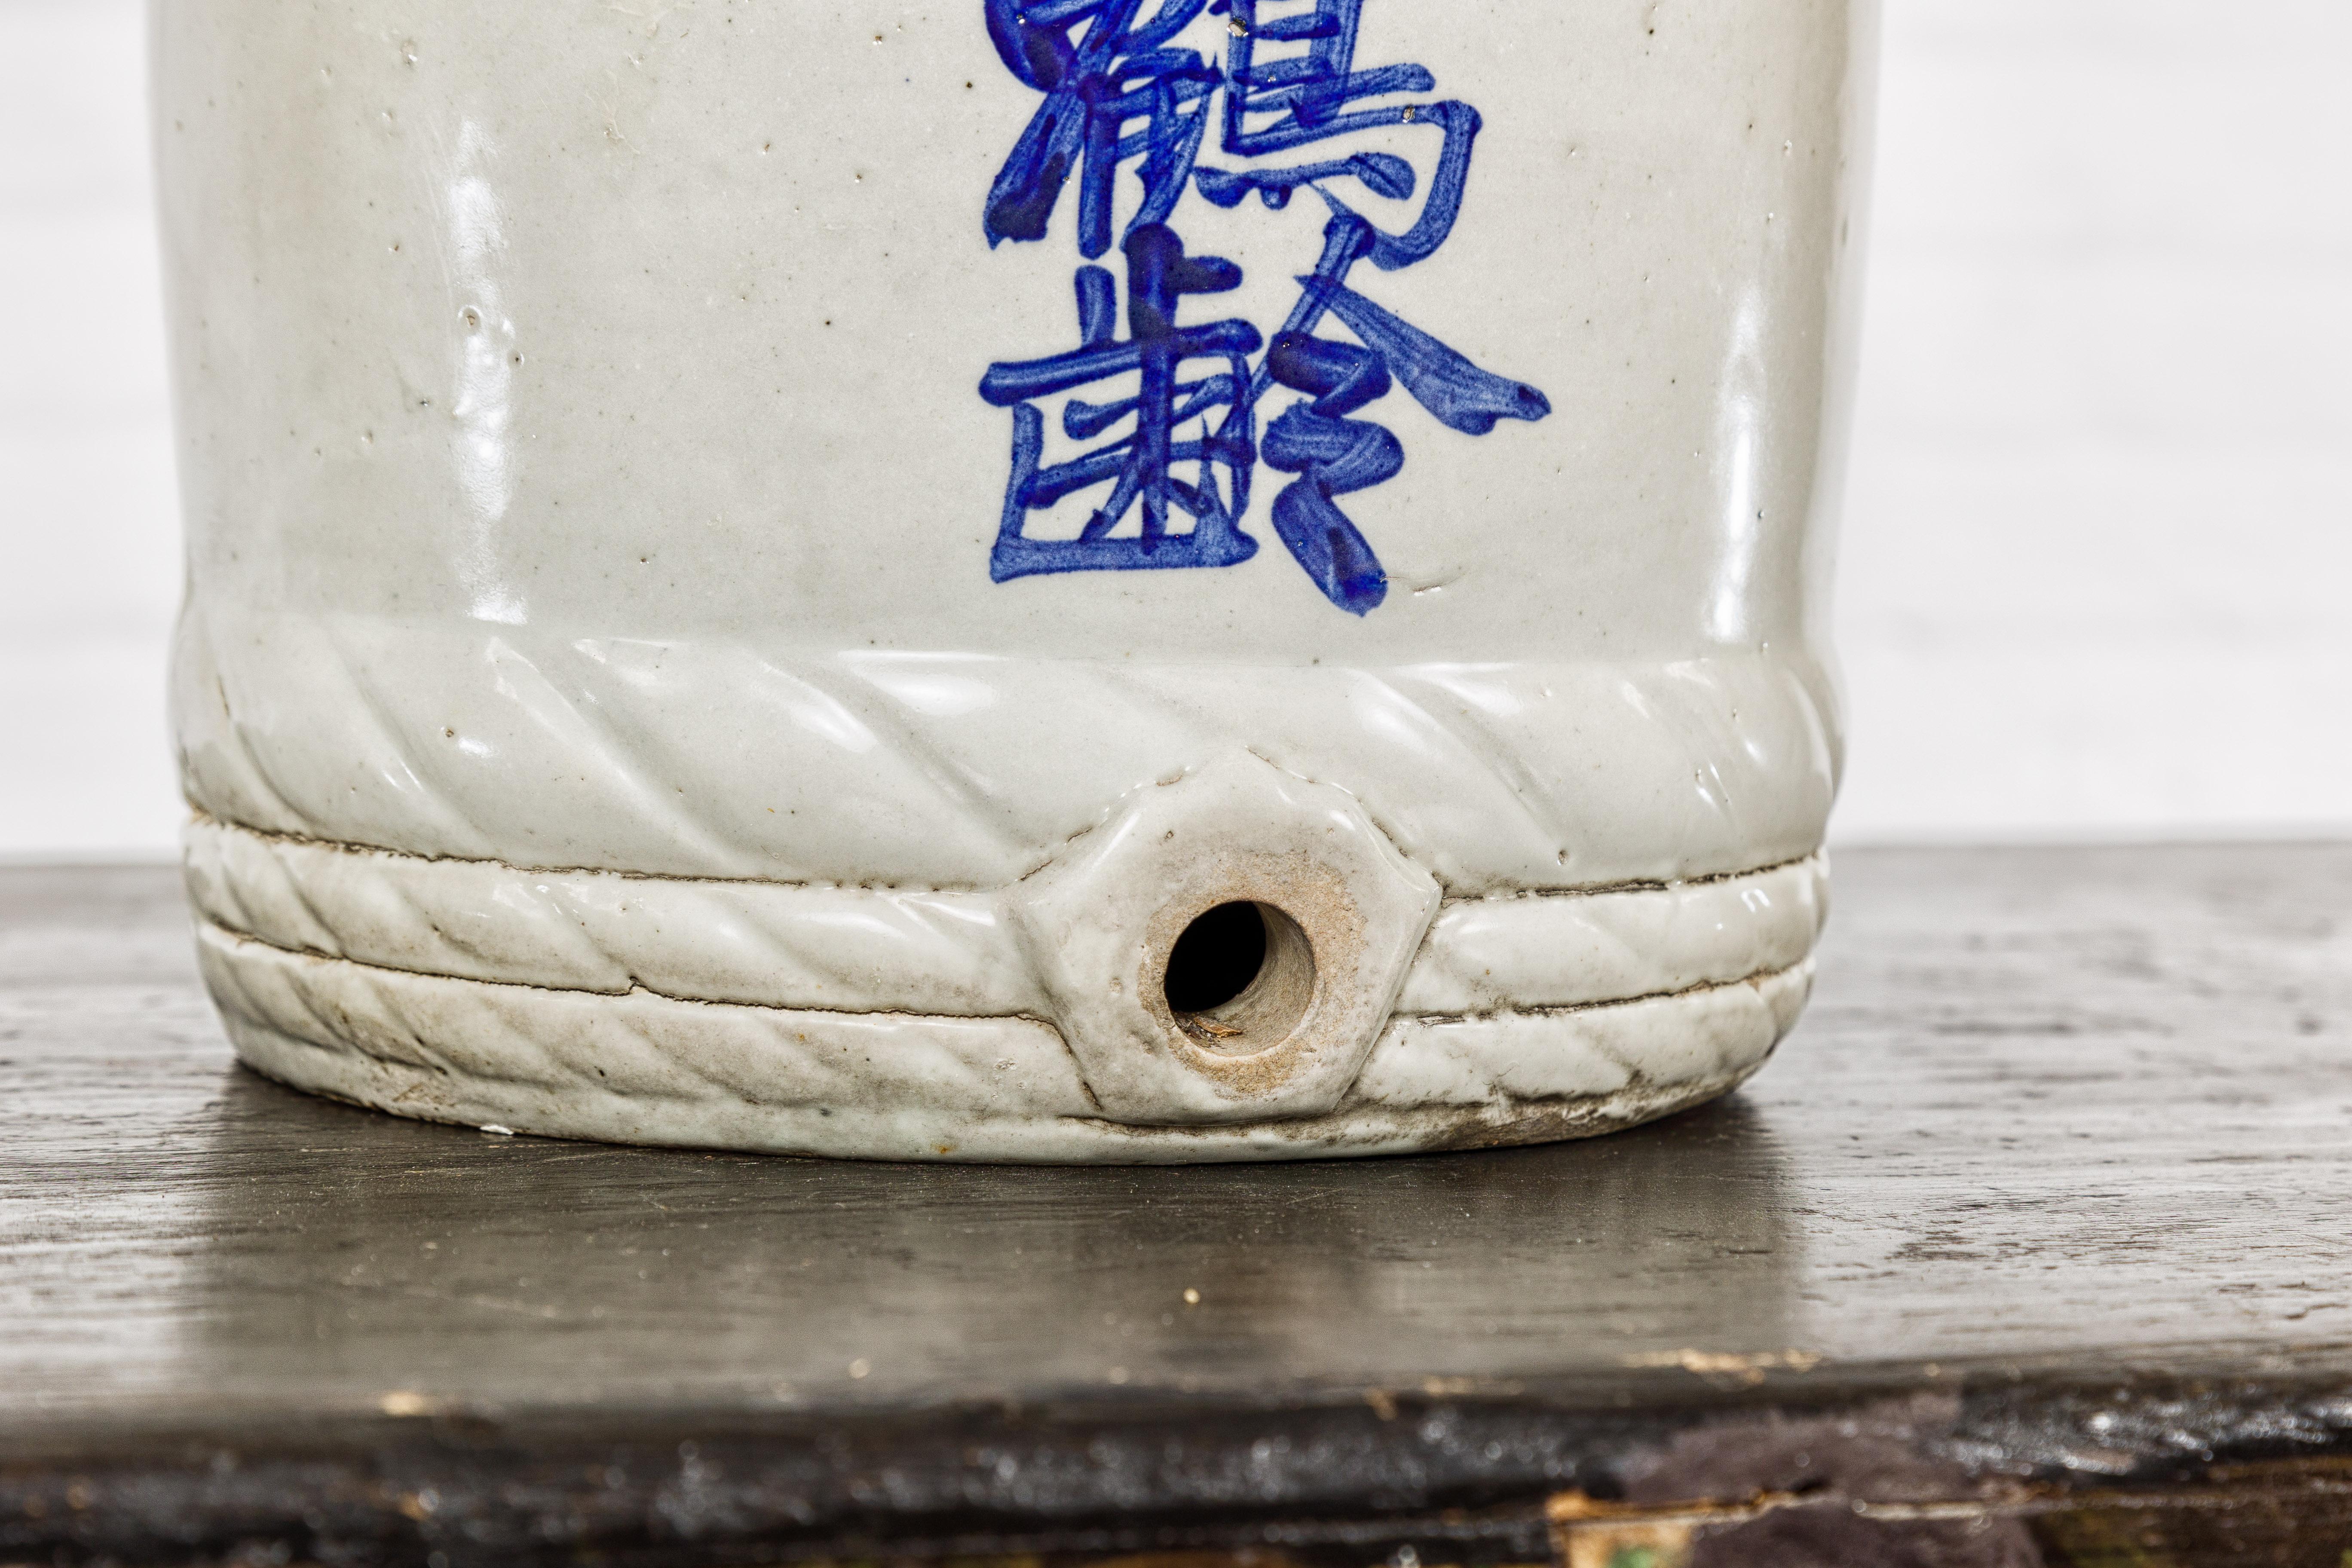 Japanese Meiji Period 19th Century Barrel Shaped Sake Jar with Calligraphy For Sale 4